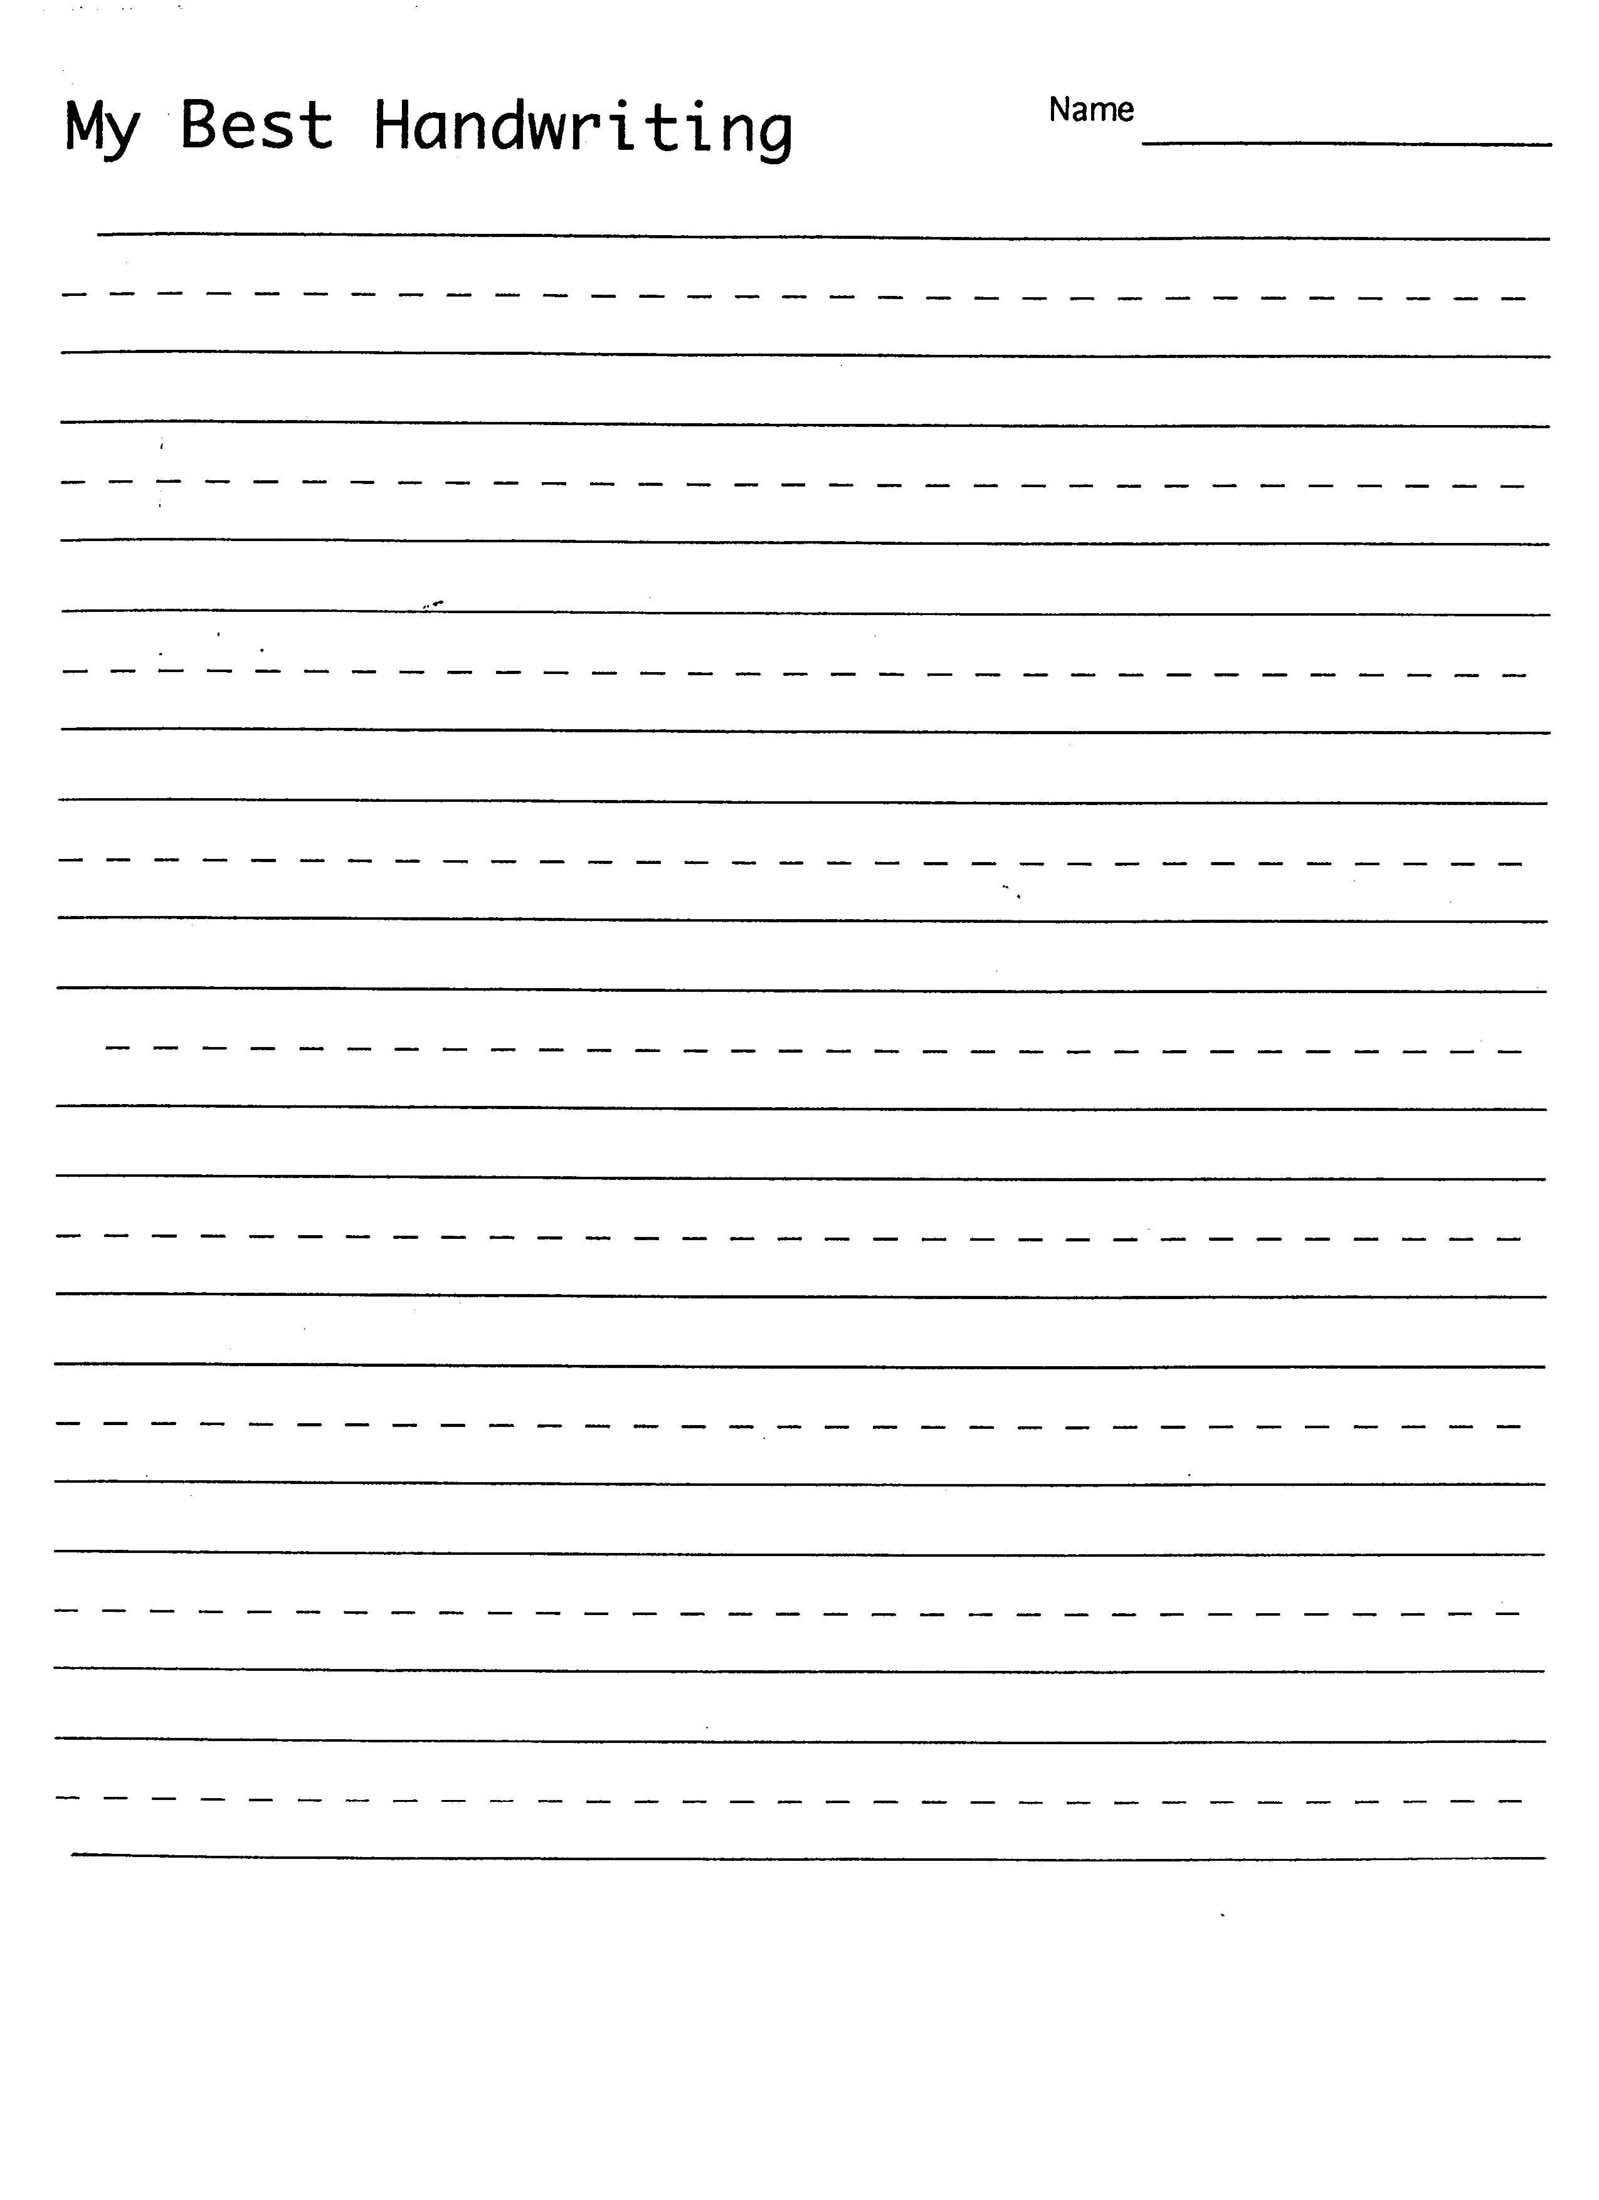 Free Addition Worksheets for Kindergarten as Well as Make Your Own Handwritingheets for Kindergarten 1st Grade Unique